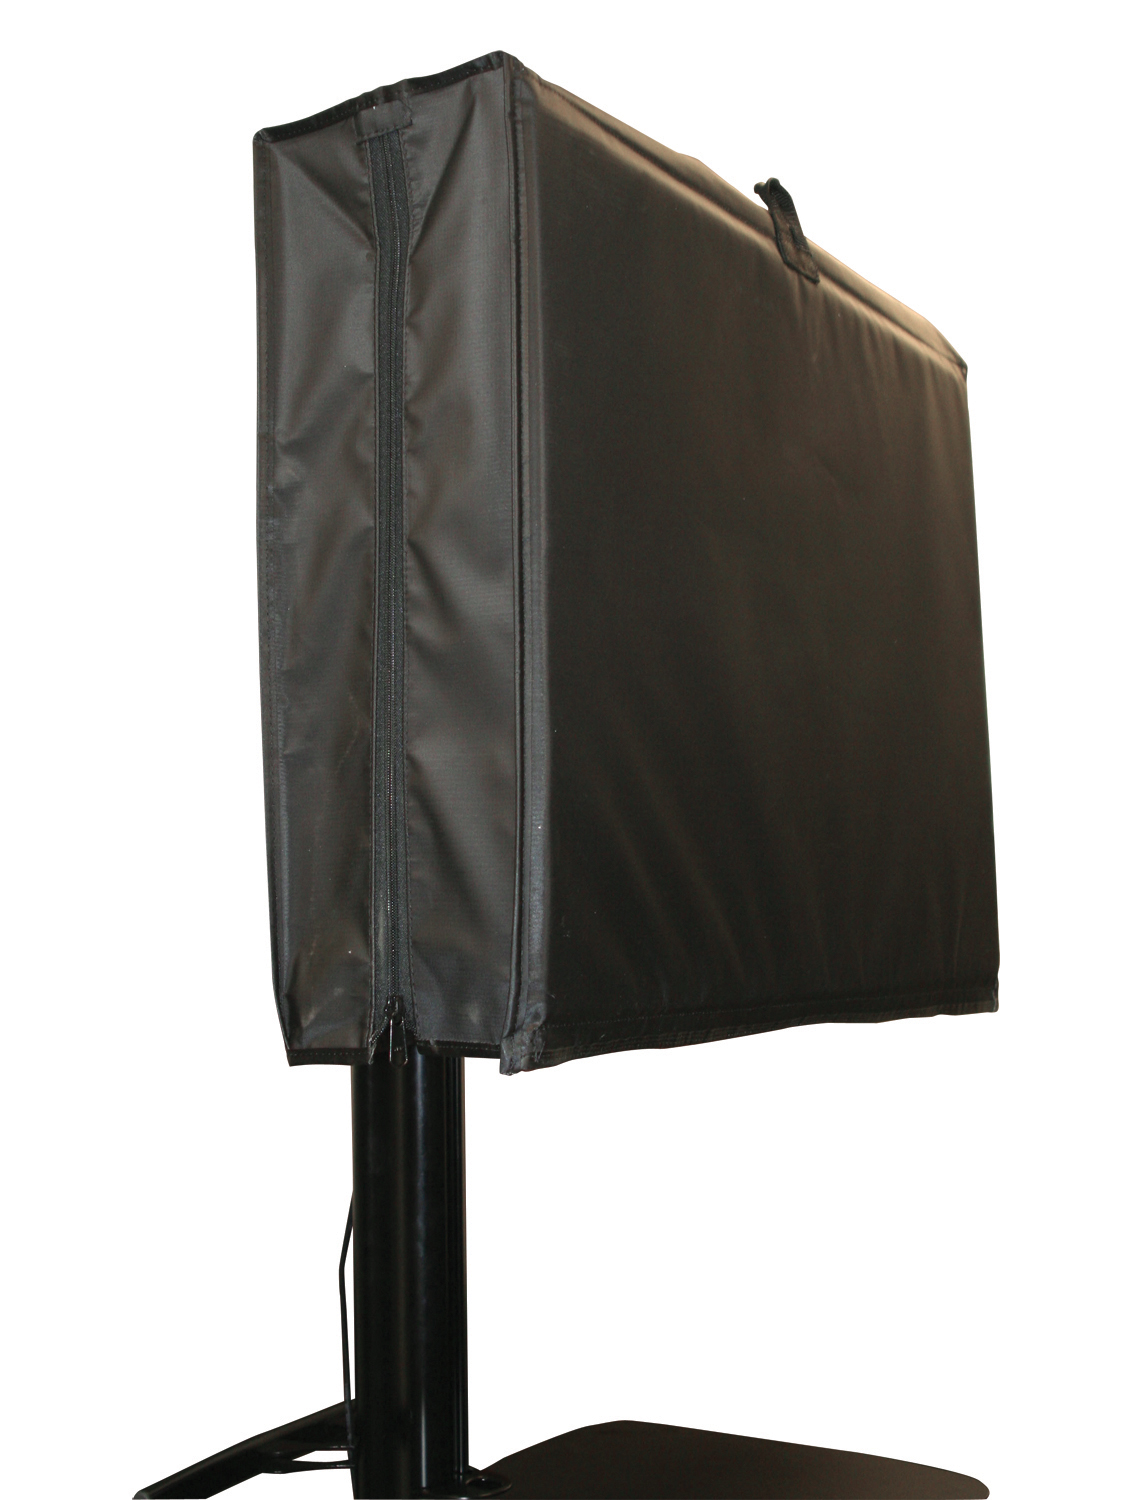 65″ LCD screen cover